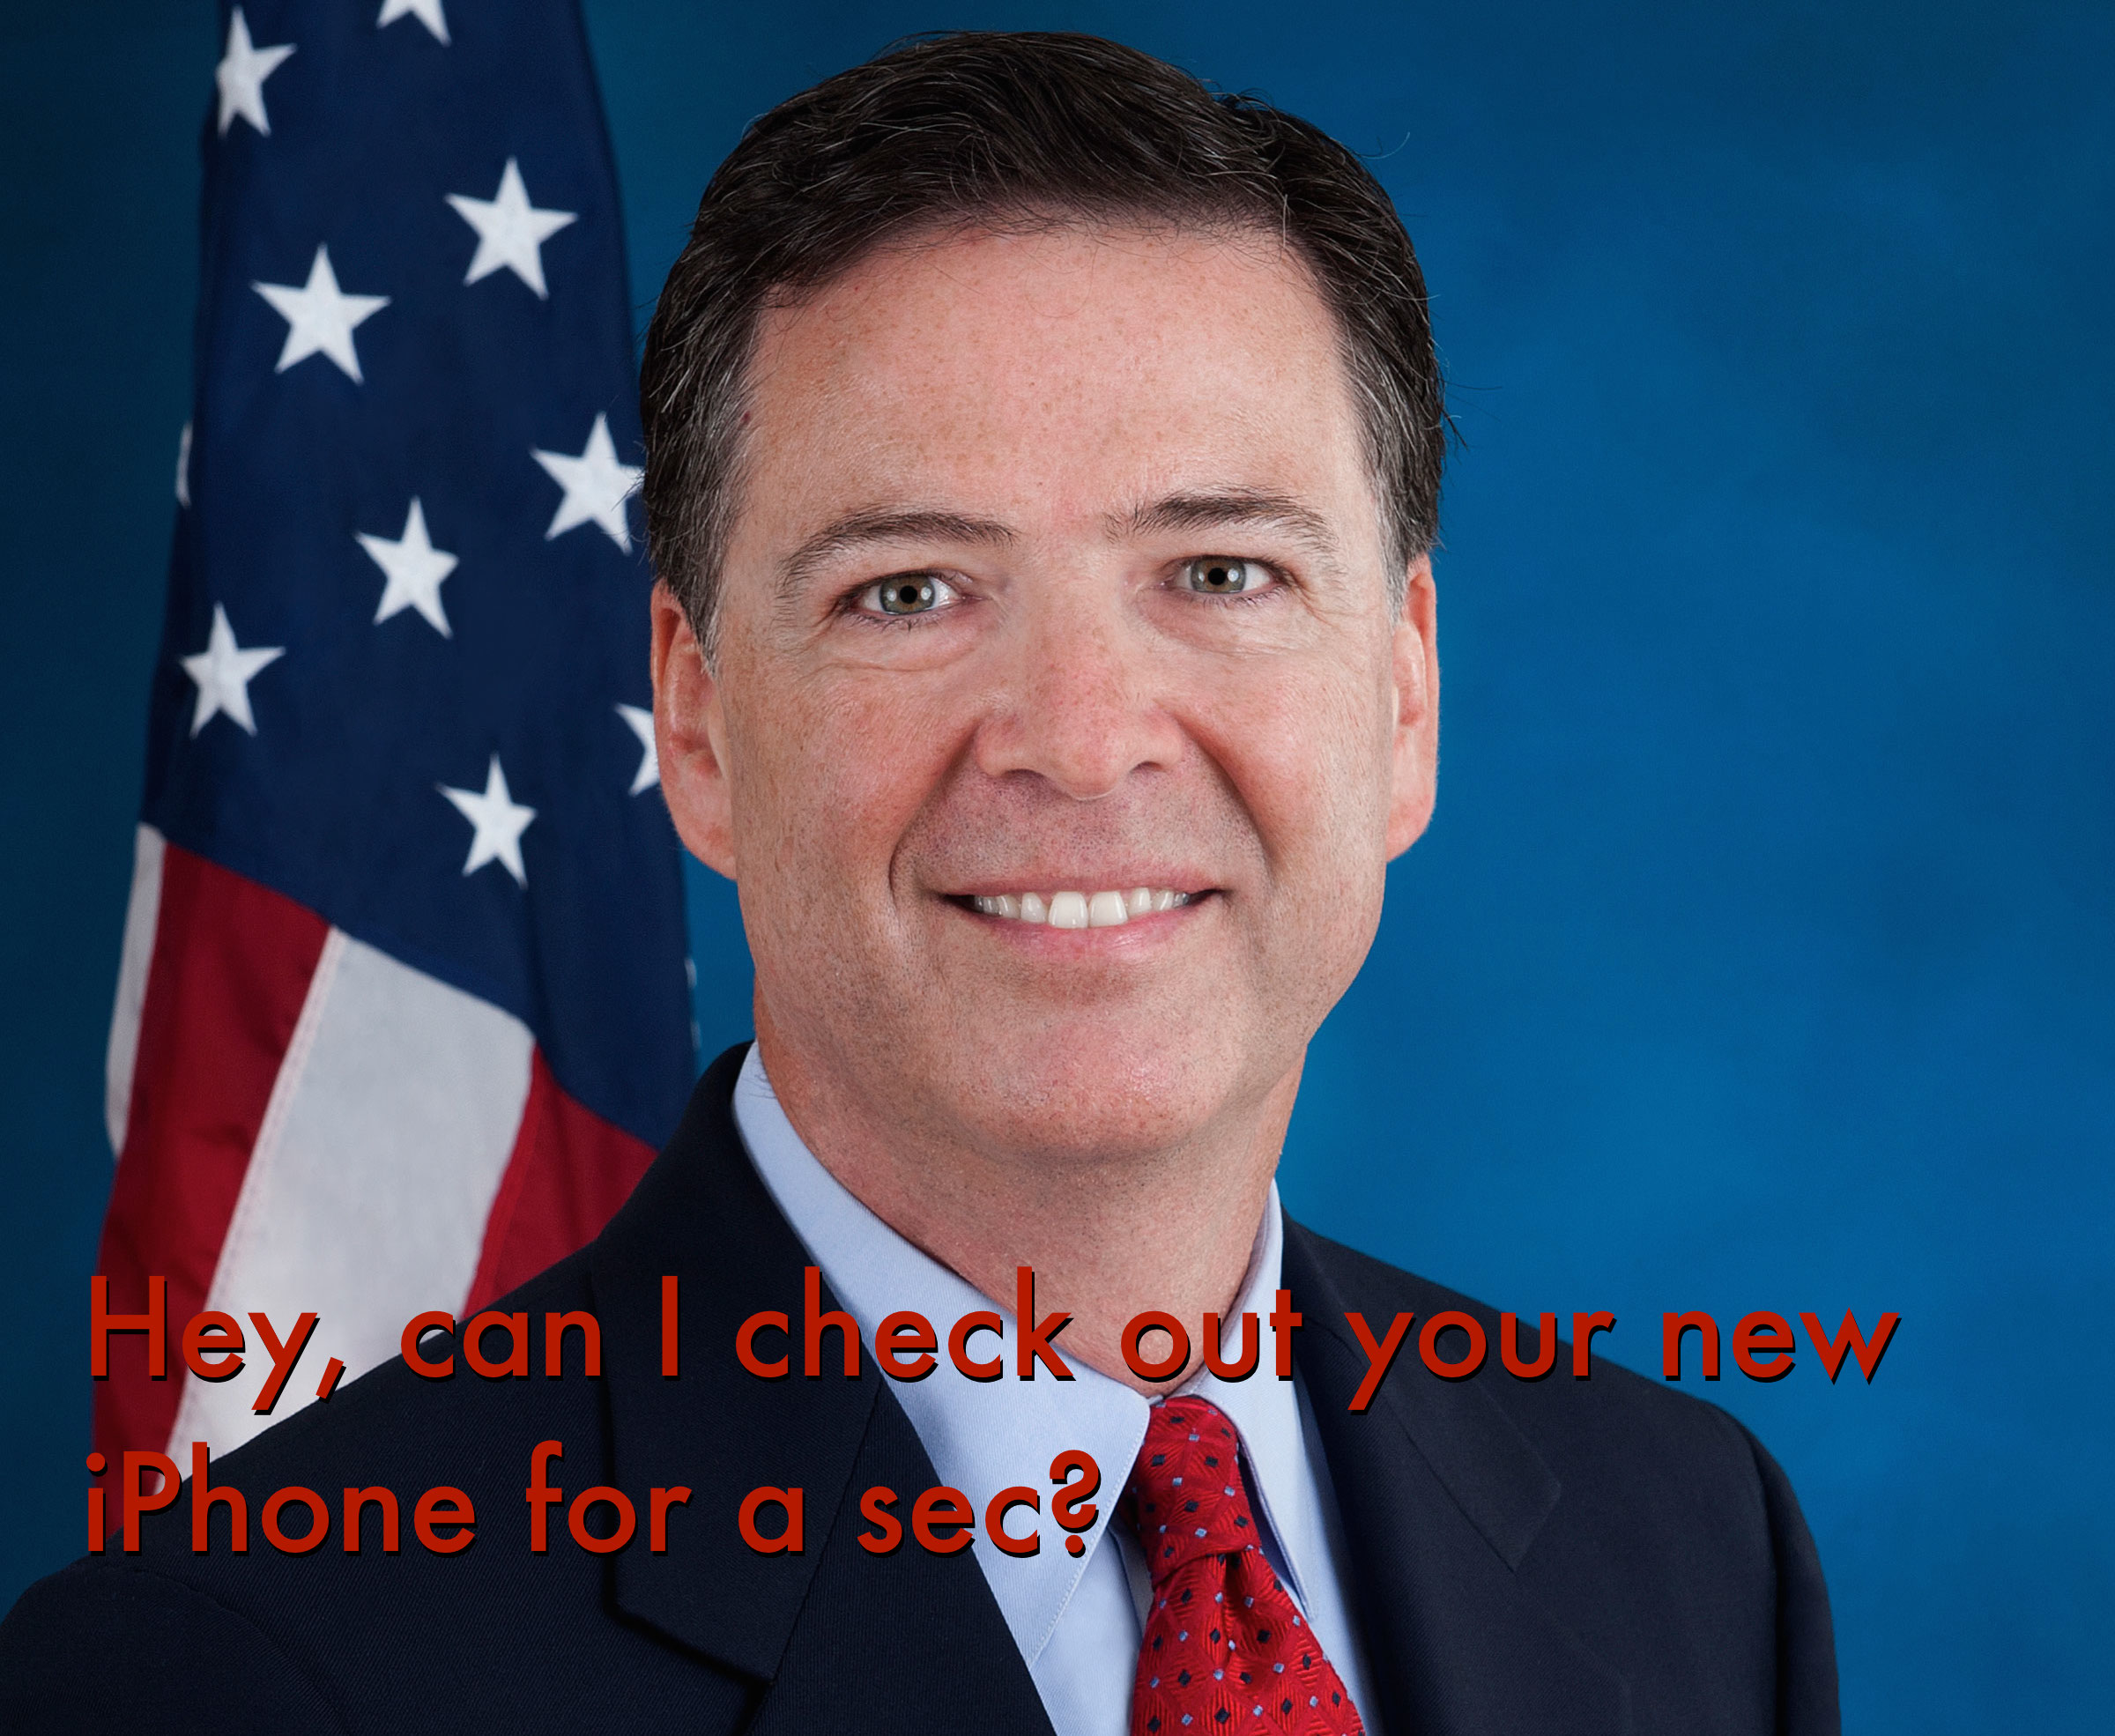 FBI Director Concerned About Smartphones The Police Can’t Search